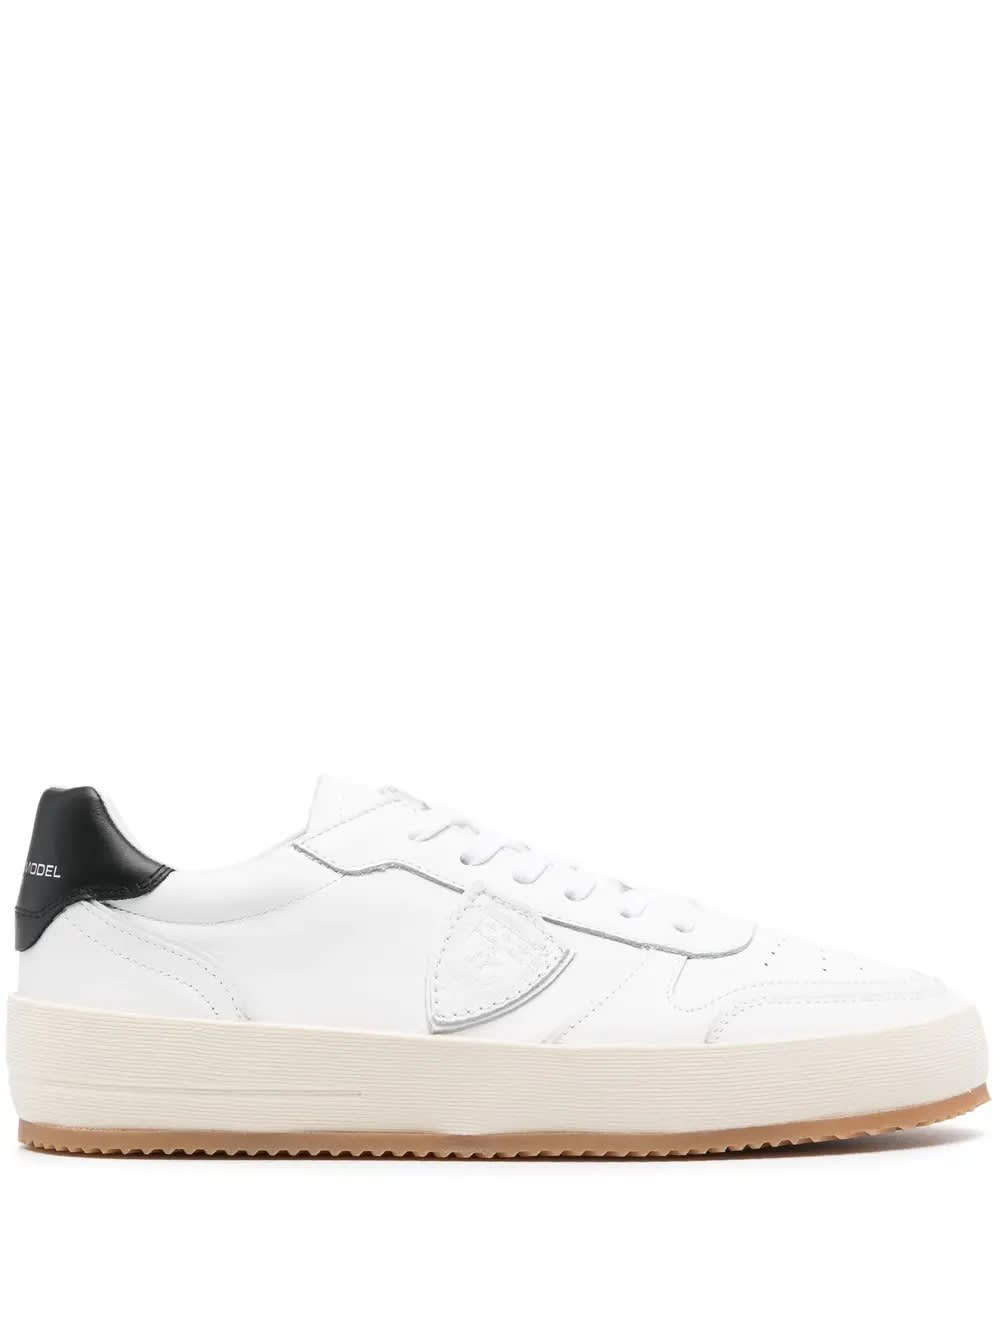 Shop Philippe Model Nice Low Sneakers - White And Black